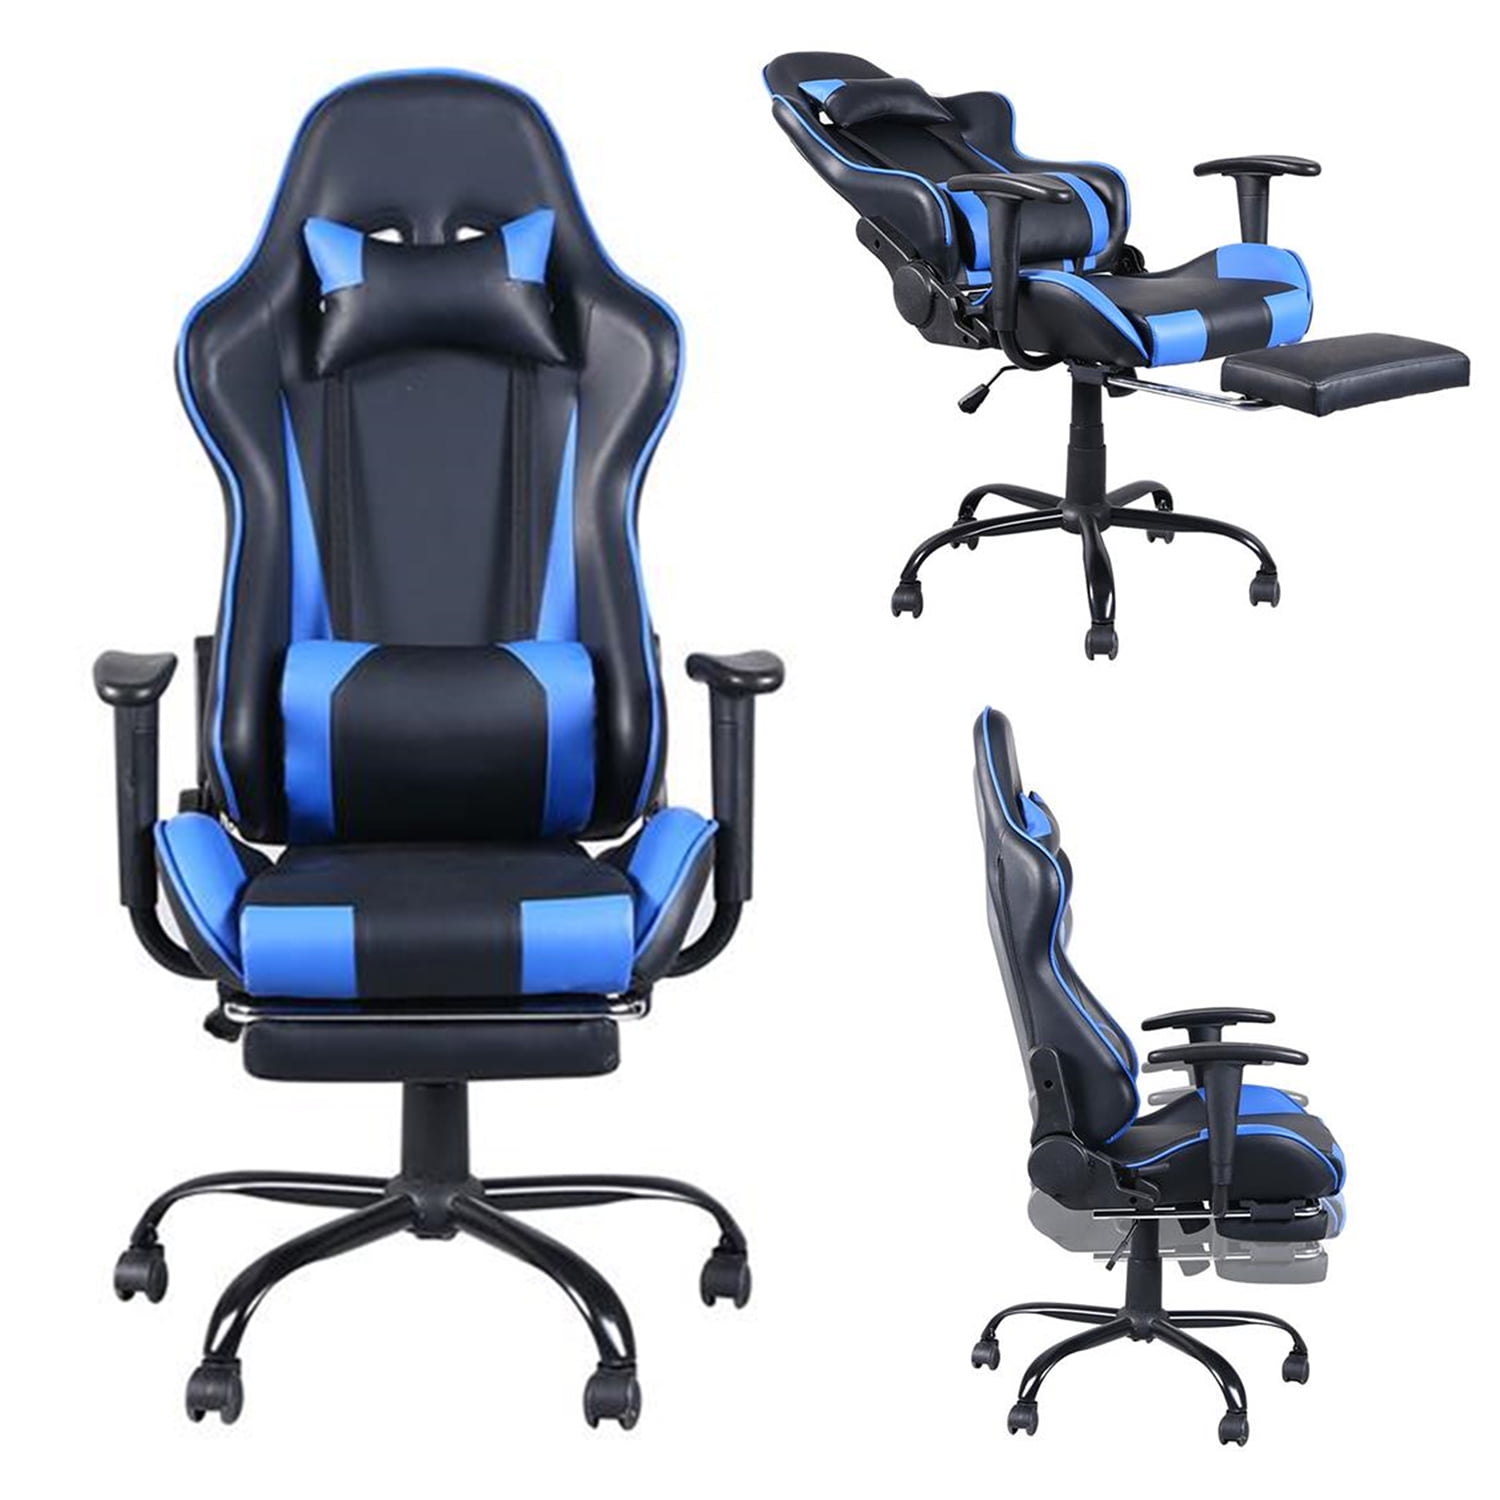 Details about   Gaming Chair Racing Computer Leather High Back Recliner office Desk Swivel Seat 